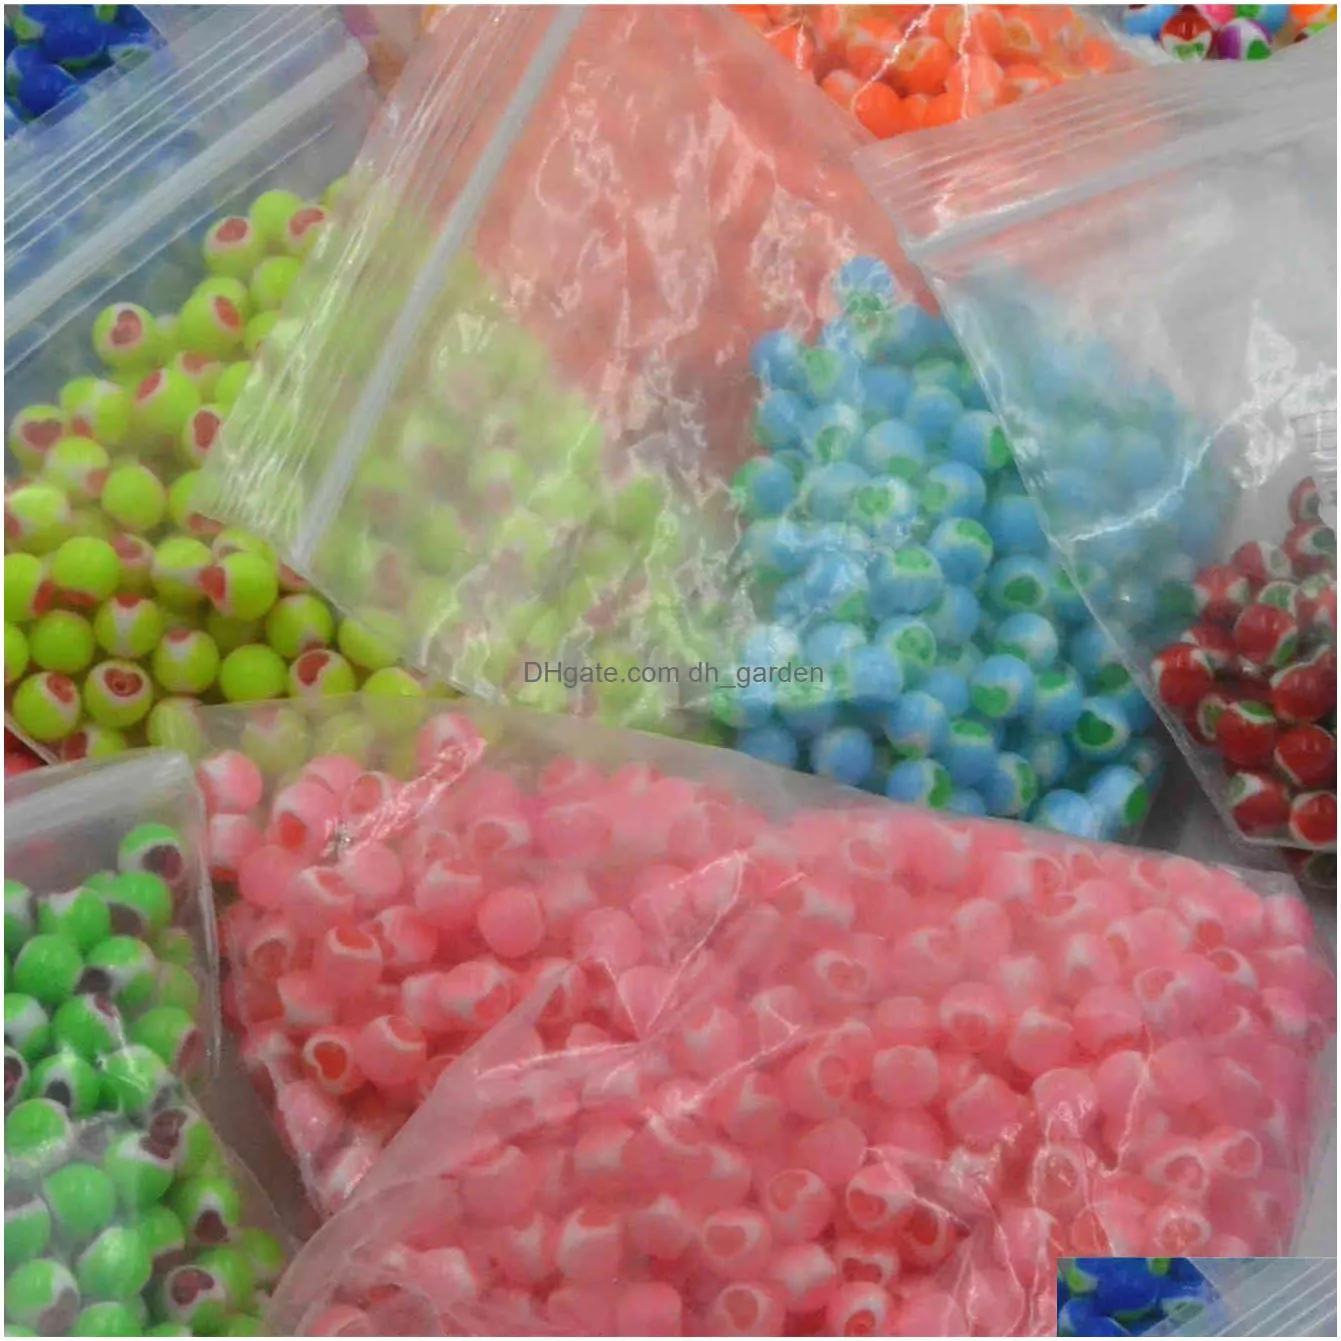 500pcs/lot piercing jewelry - colorful heart acrylic balls one hole replacement tongue/navel/nipple body piercing 1.6gx6mm